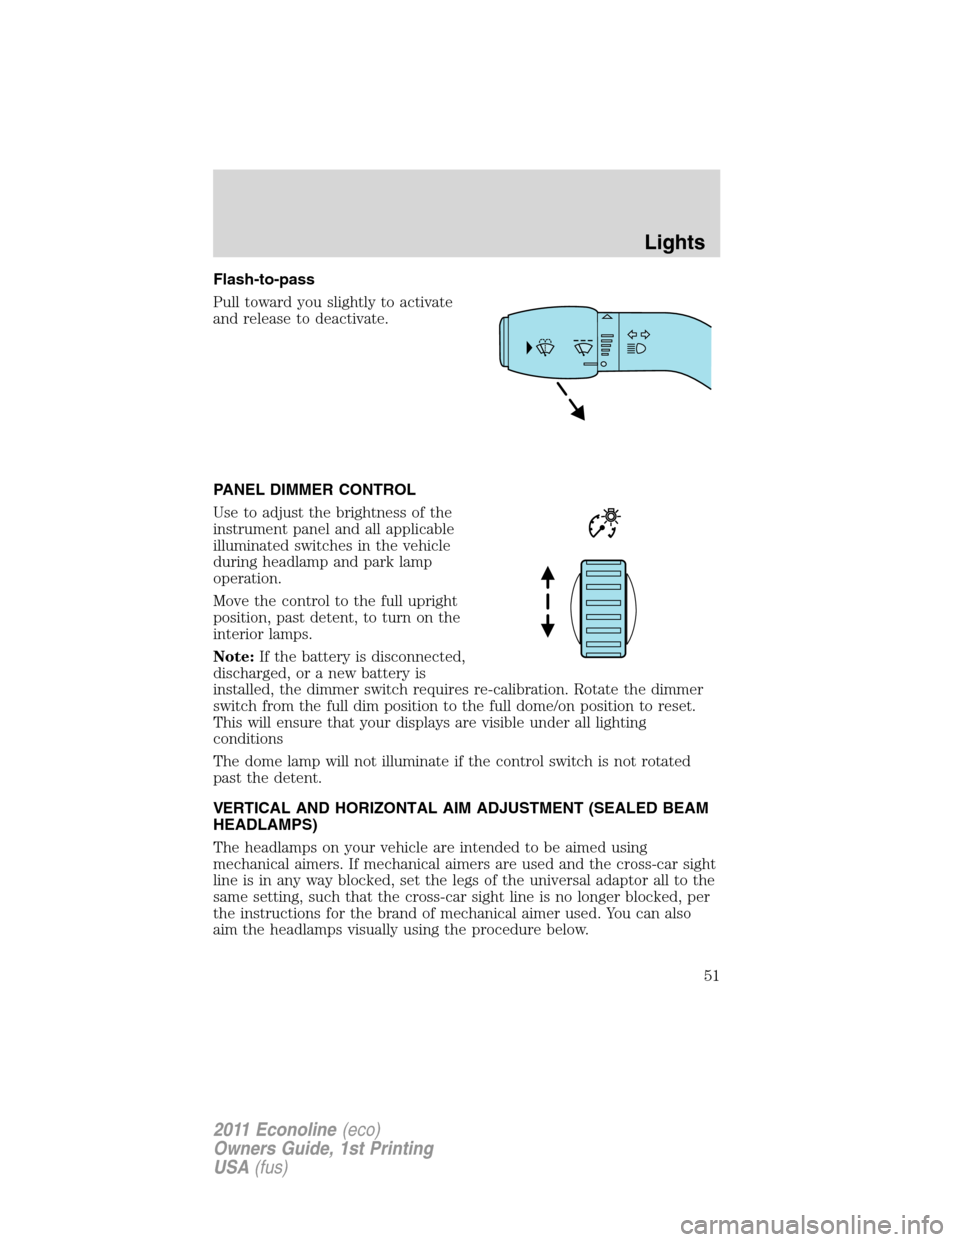 FORD E SERIES 2011 4.G Owners Manual Flash-to-pass
Pull toward you slightly to activate
and release to deactivate.
PANEL DIMMER CONTROL
Use to adjust the brightness of the
instrument panel and all applicable
illuminated switches in the v